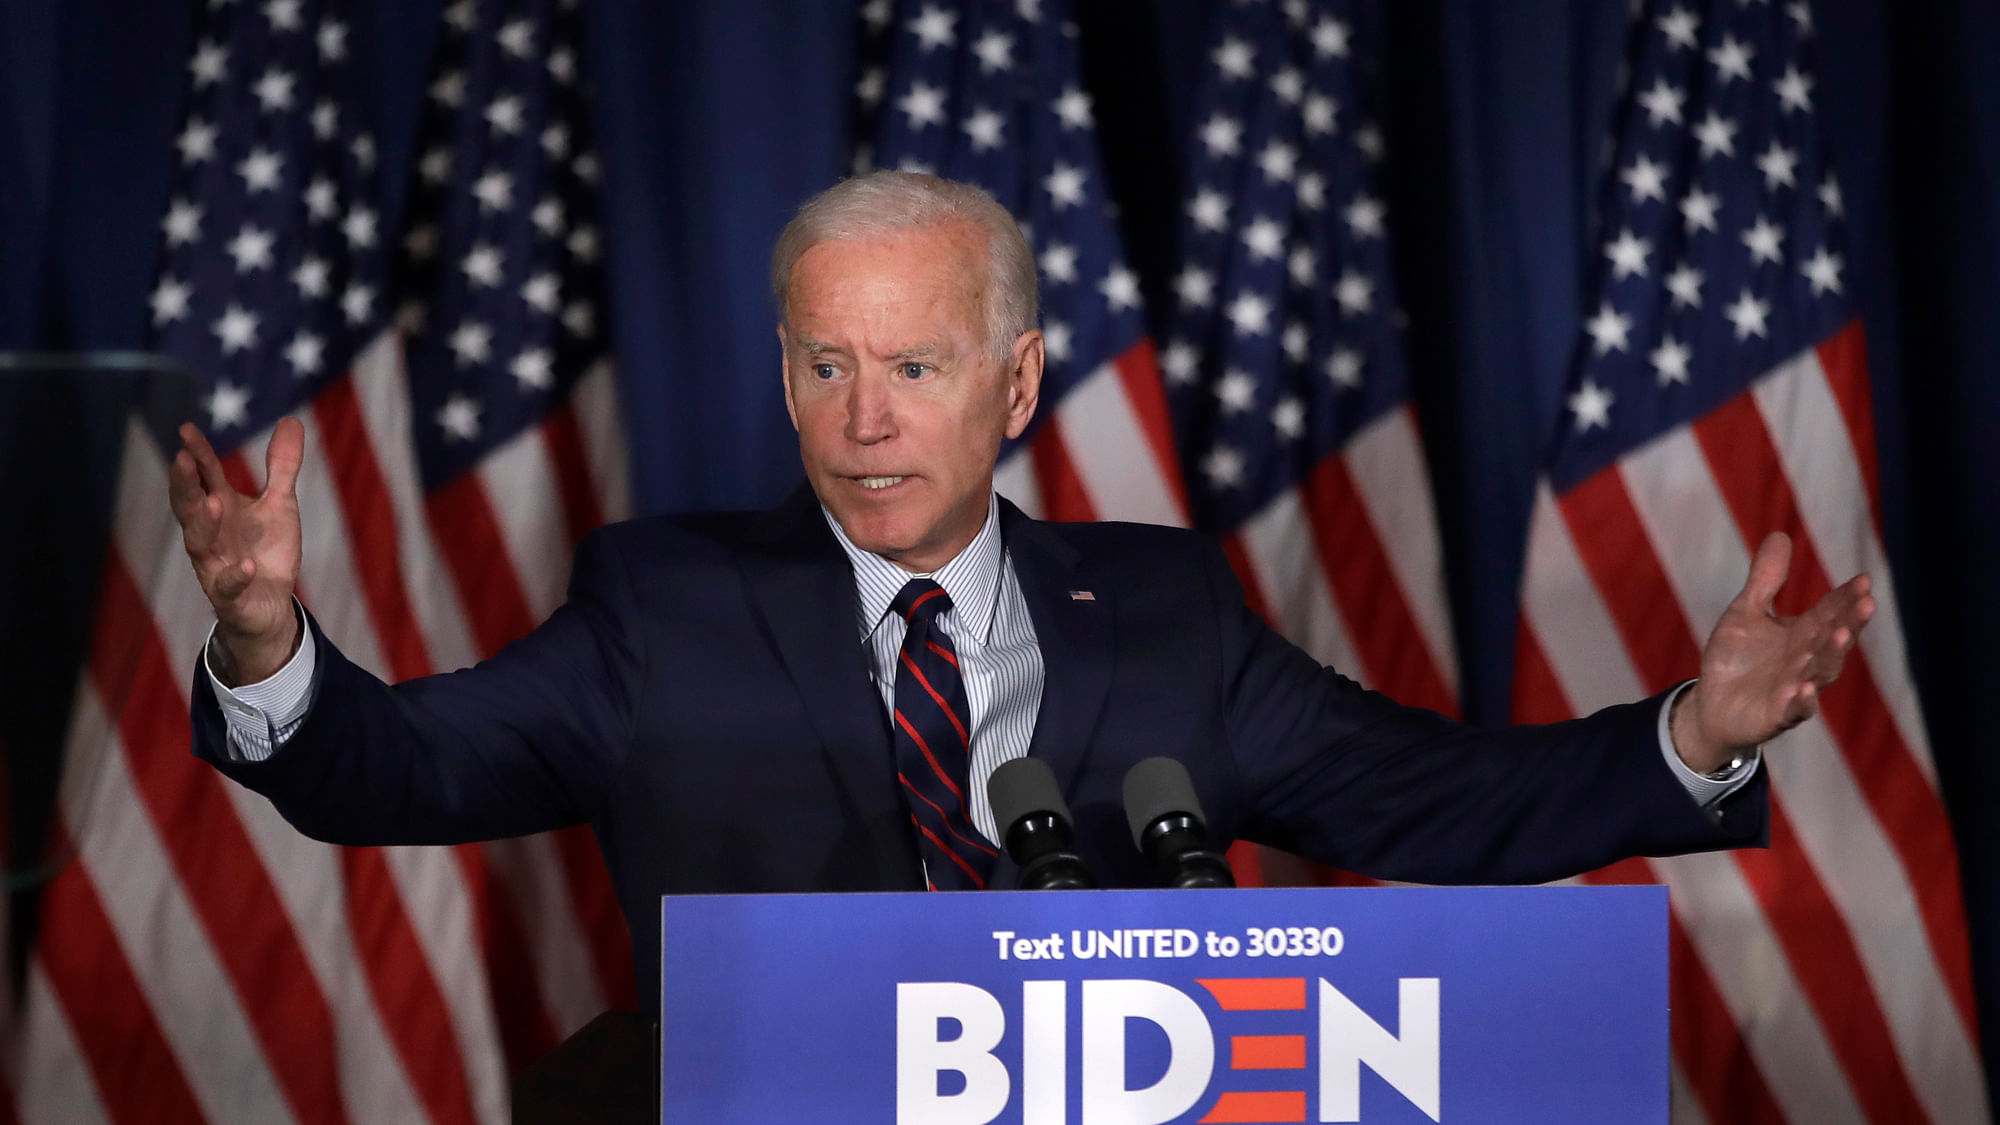 Democratic presidential candidate and former Vice President Joe Biden at a campaign event, held on Wednesday, 9 October.